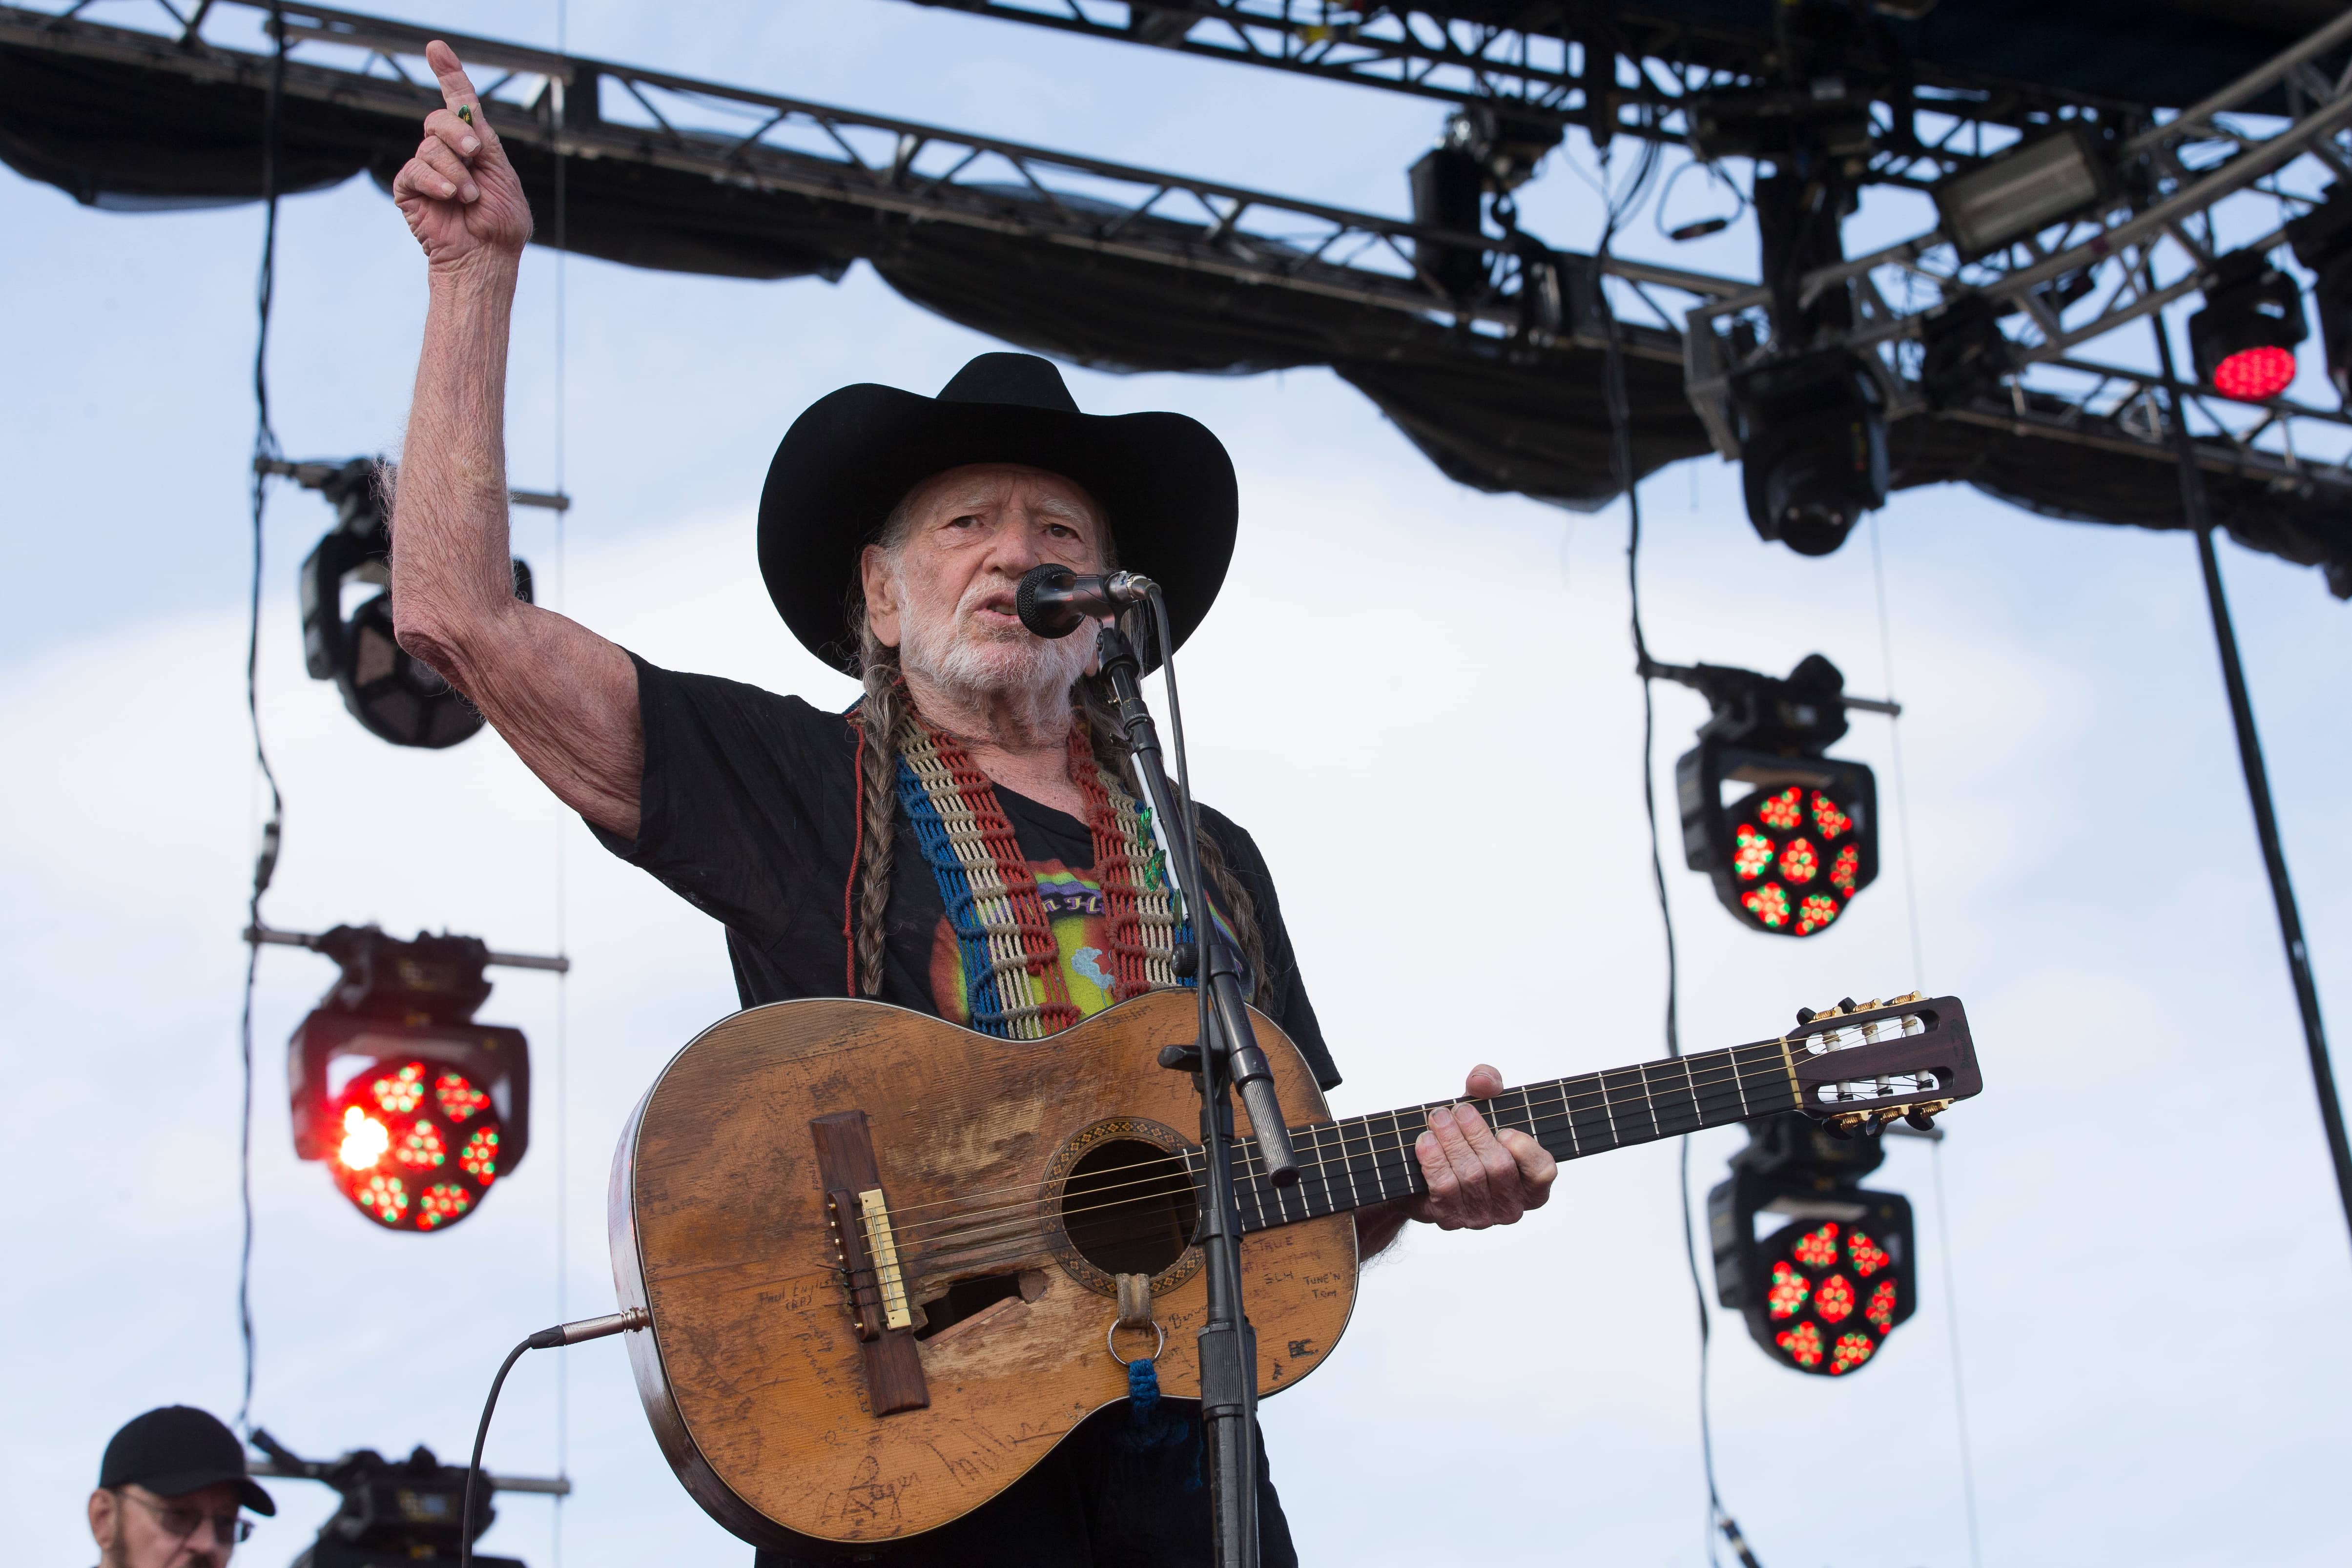 Willie Nelson’s 90th Birthday w/ Neil Young, The Chicks, Snoop & More